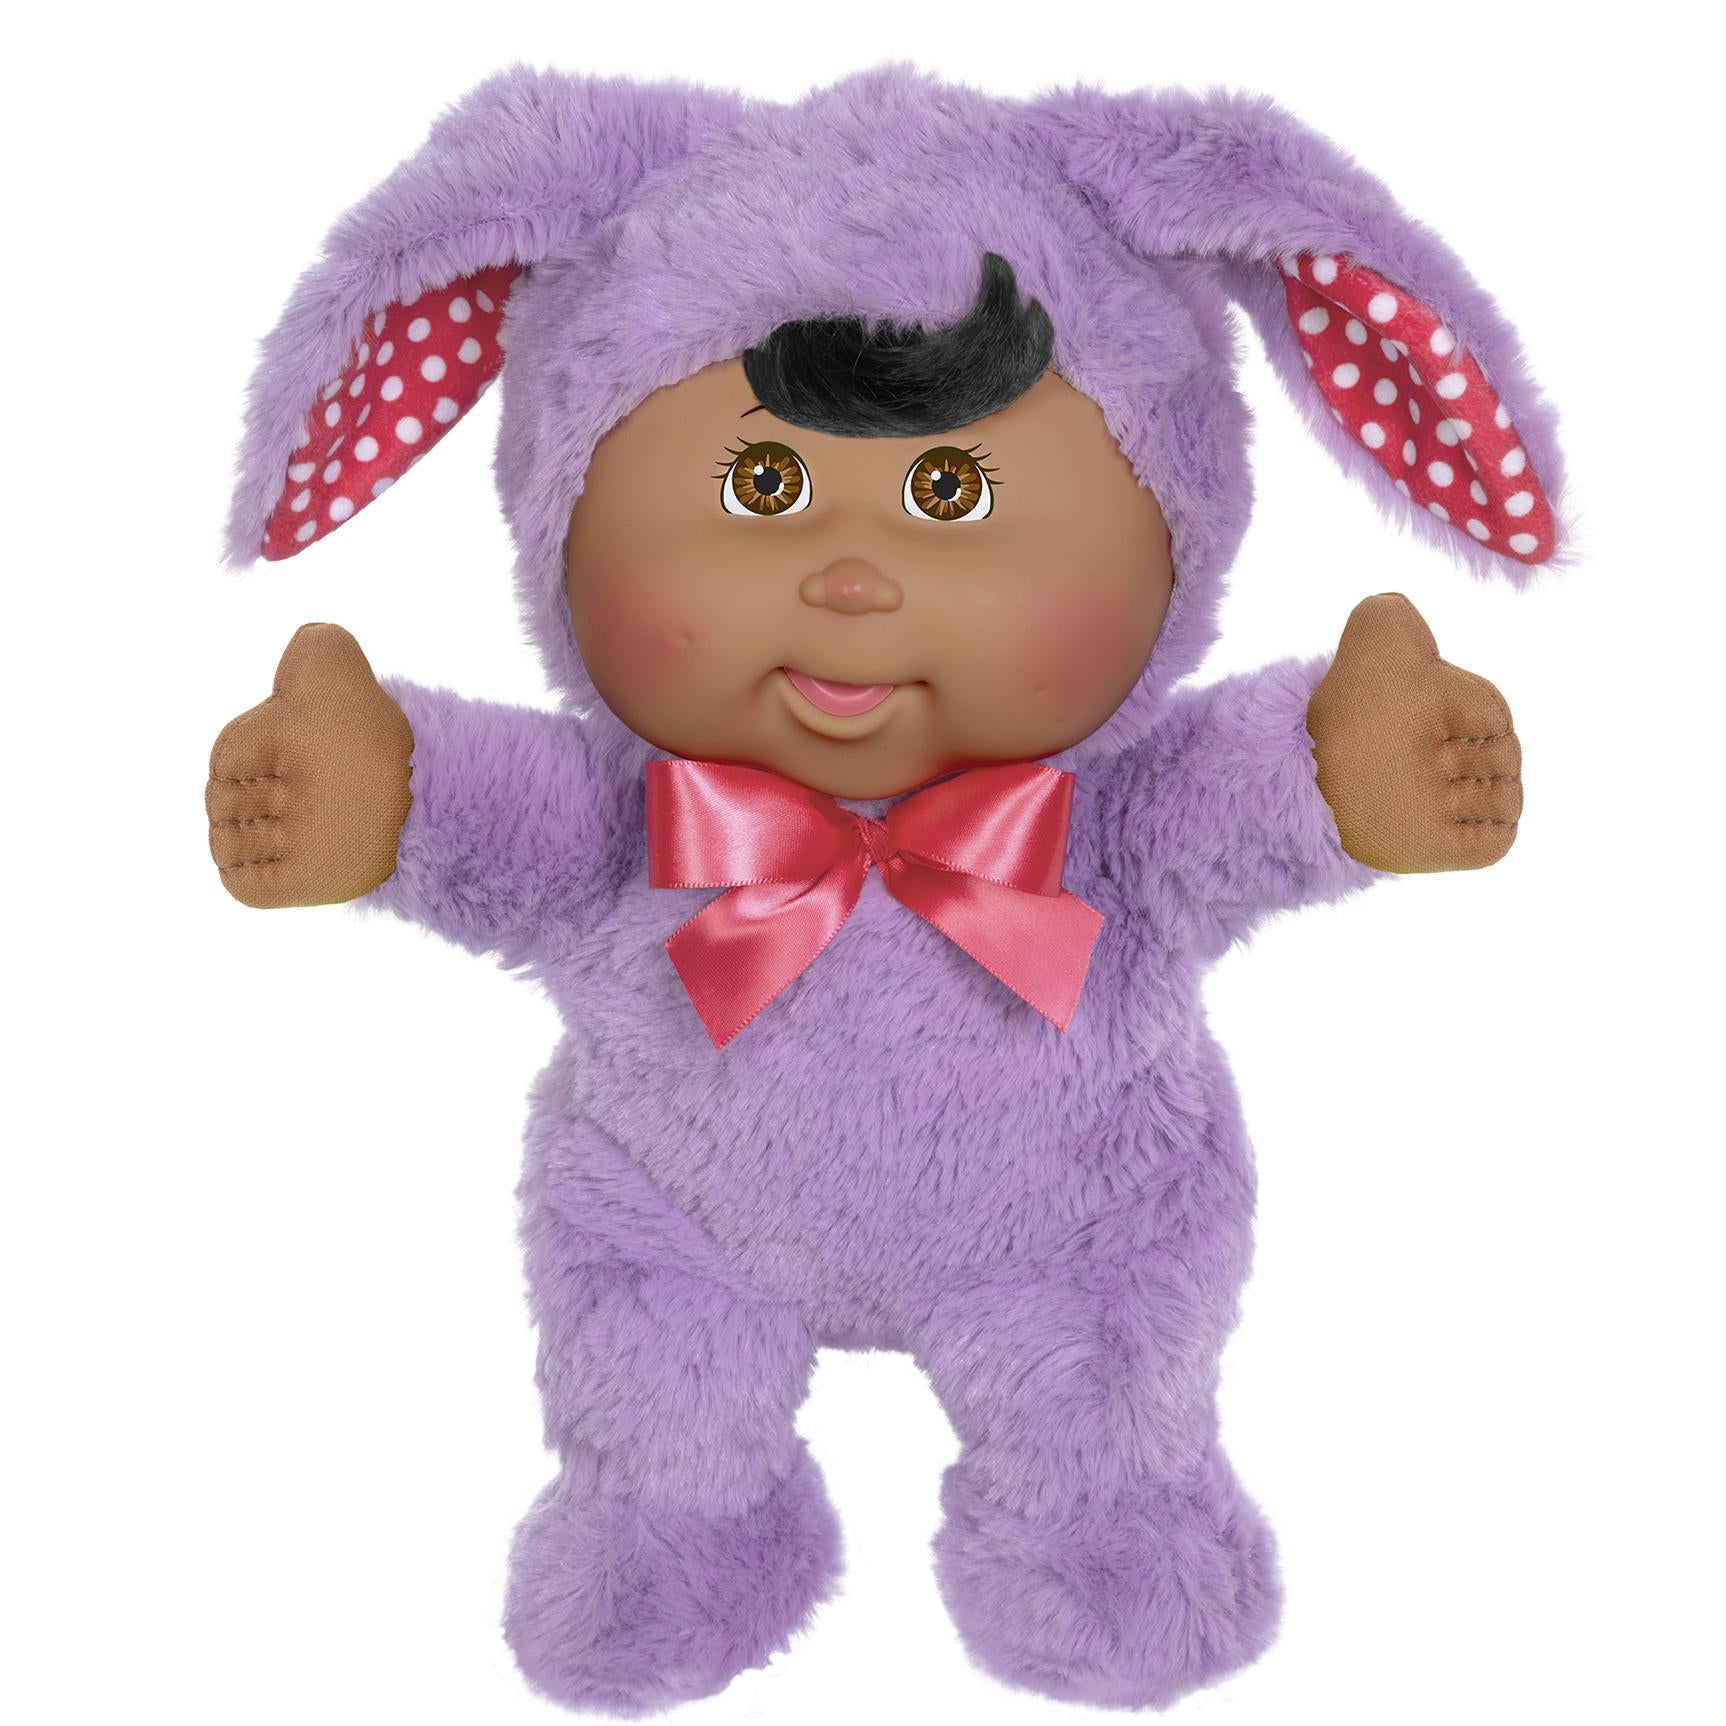 11" Deluxe Toddler Giggle Time DRK BRO BLA Purple Bunny Fashion